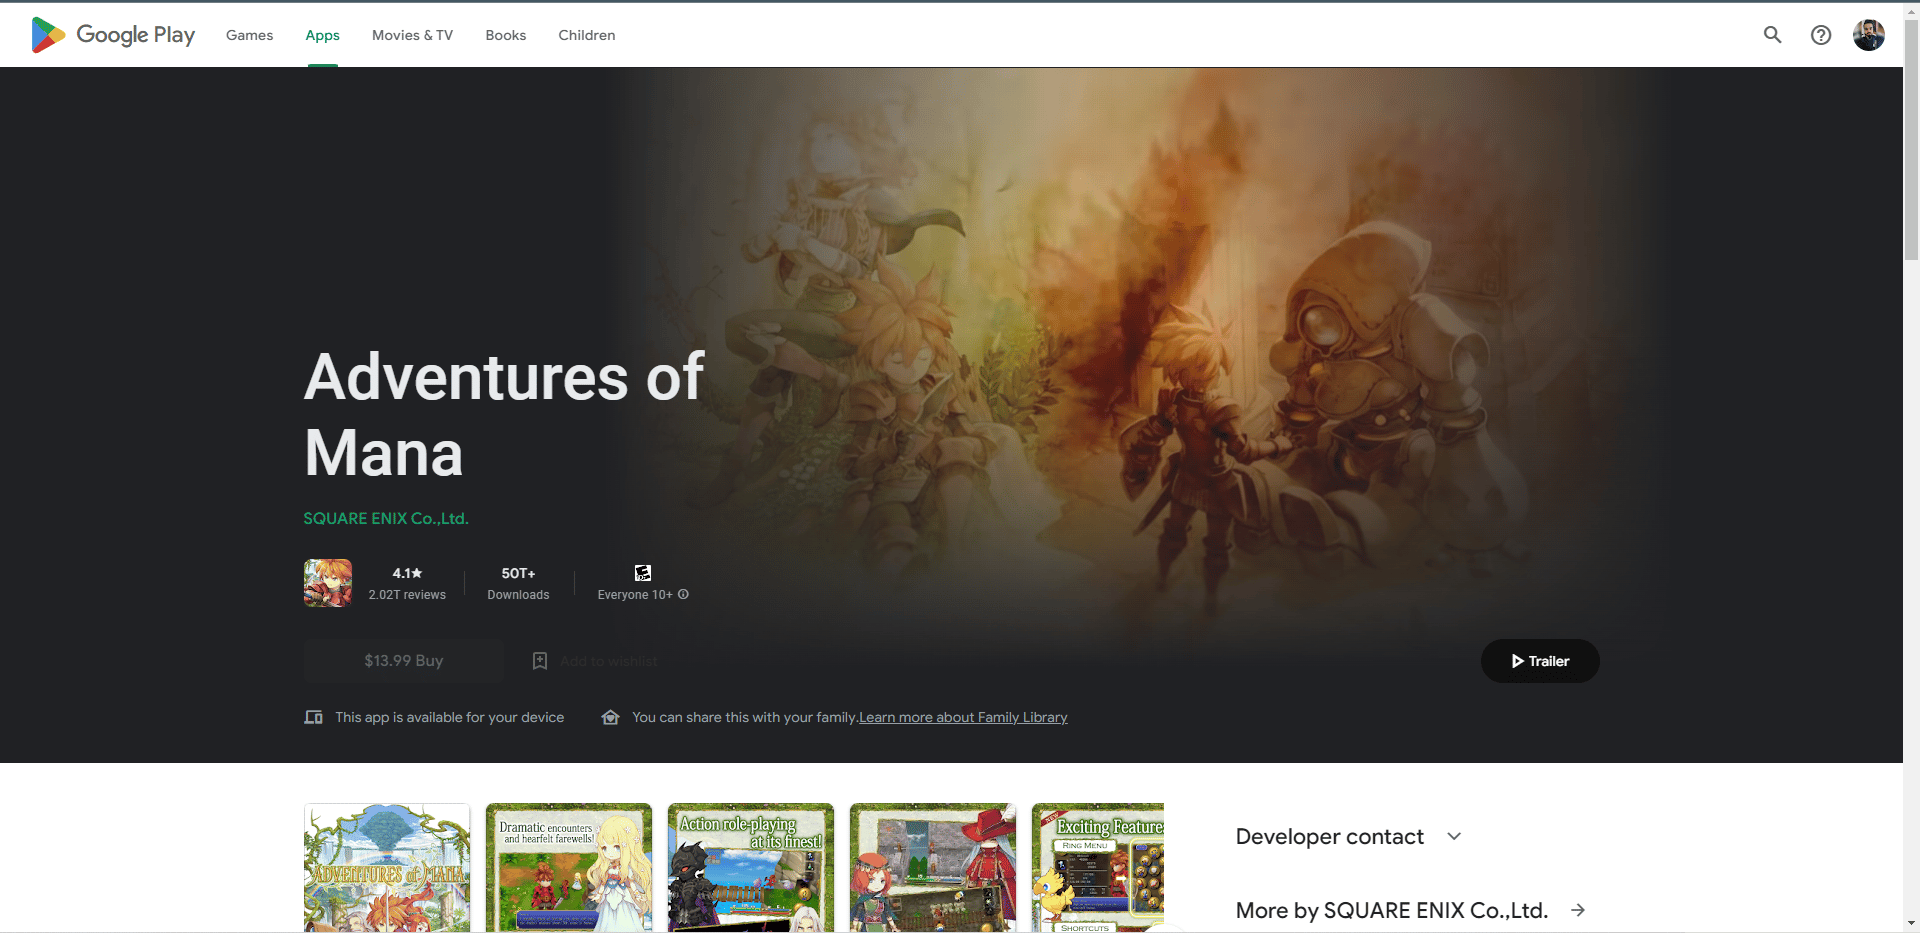 Adventures of Mana play store webpage